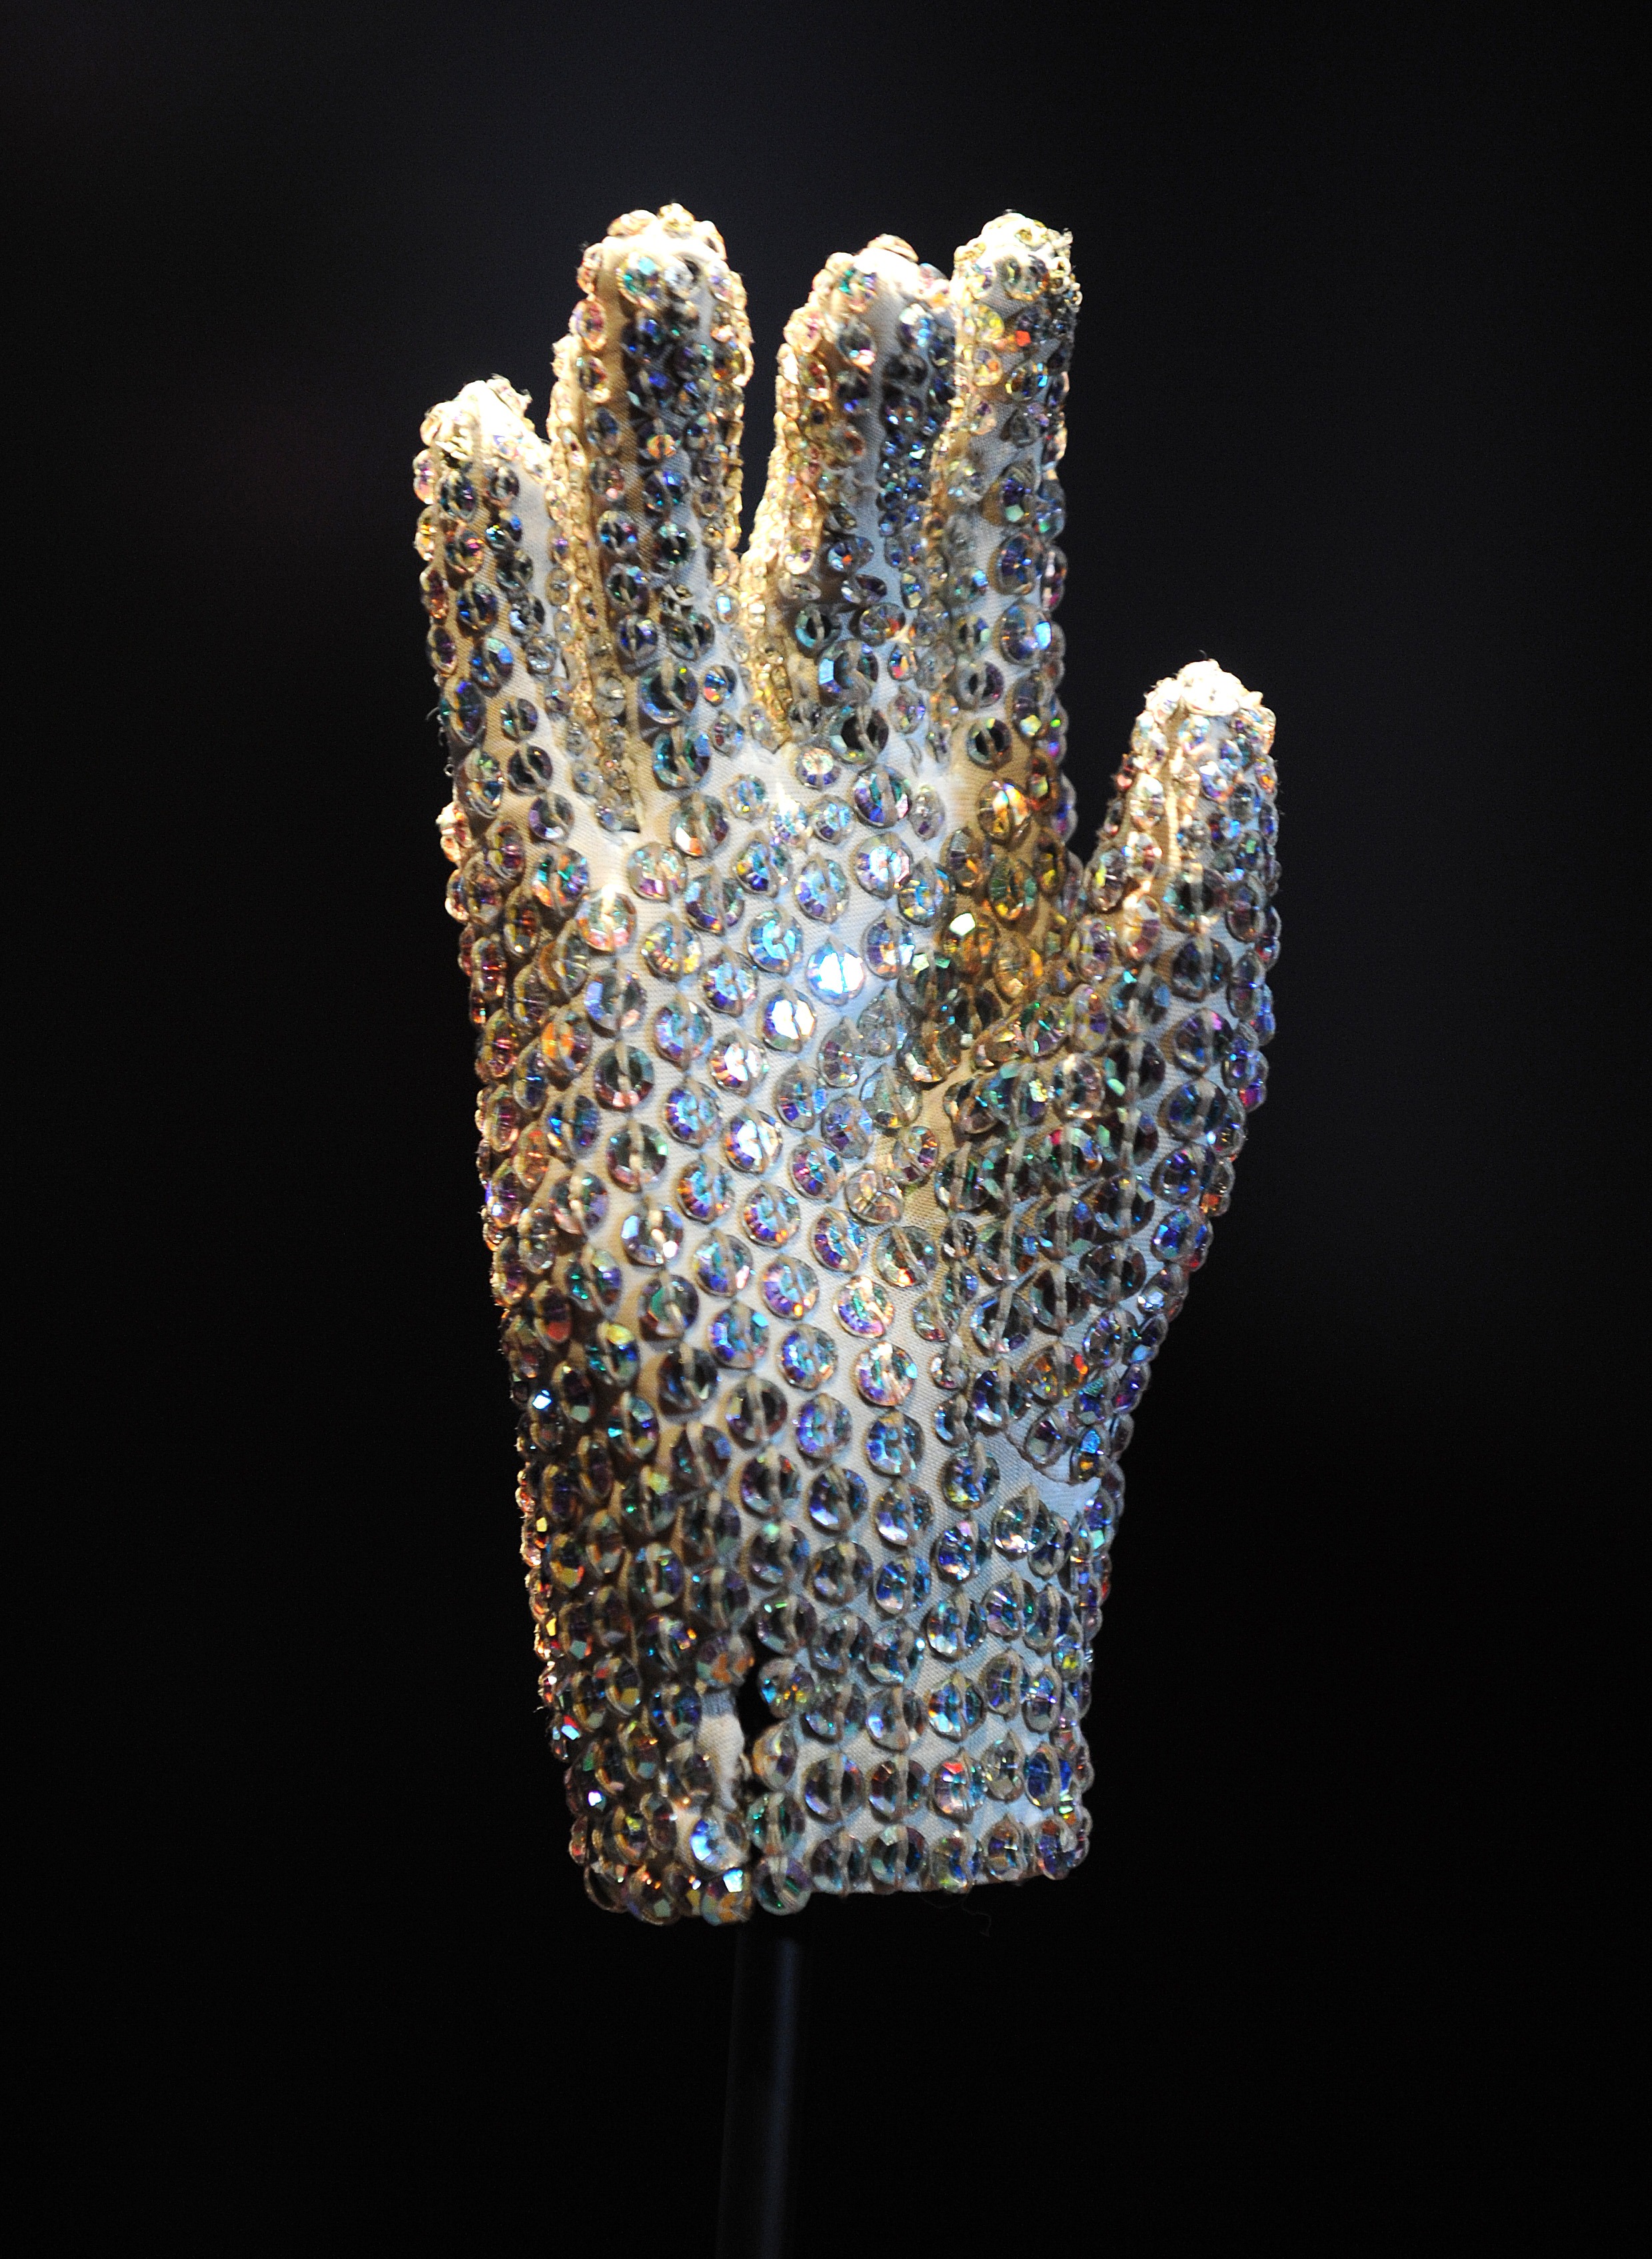 The famous white glove worn by Michael Jackson when he performed Billie Jean at the Grammy Awards in 1983 is seen on display at "Michael Jackson: The Official Exhibition" held at the 02 Arena on October 26, 2009 in London, England | Source: Getty Images